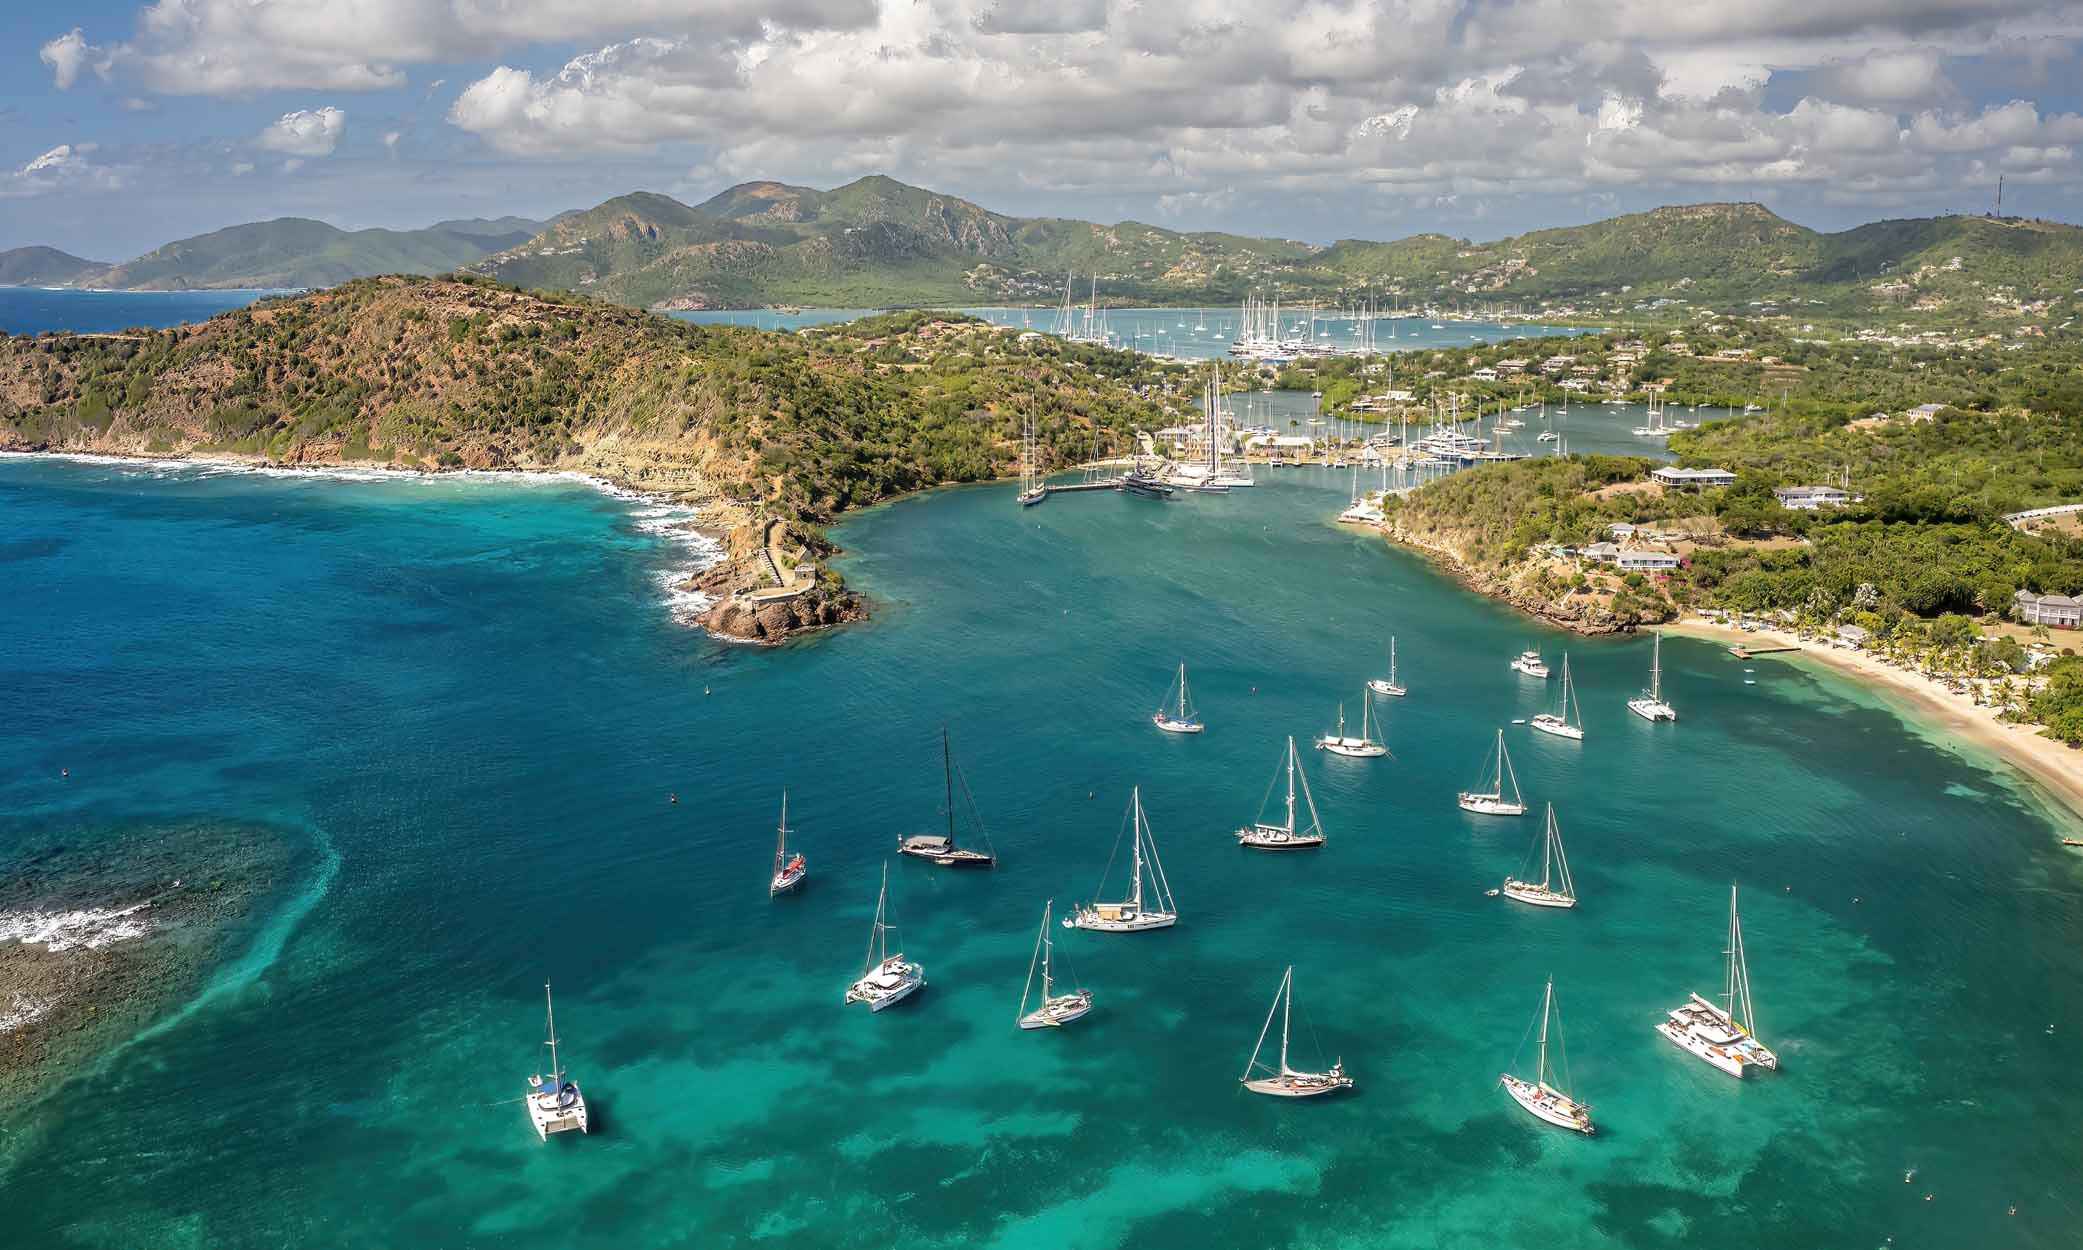 Antigua amazes no matter how many times you've been.